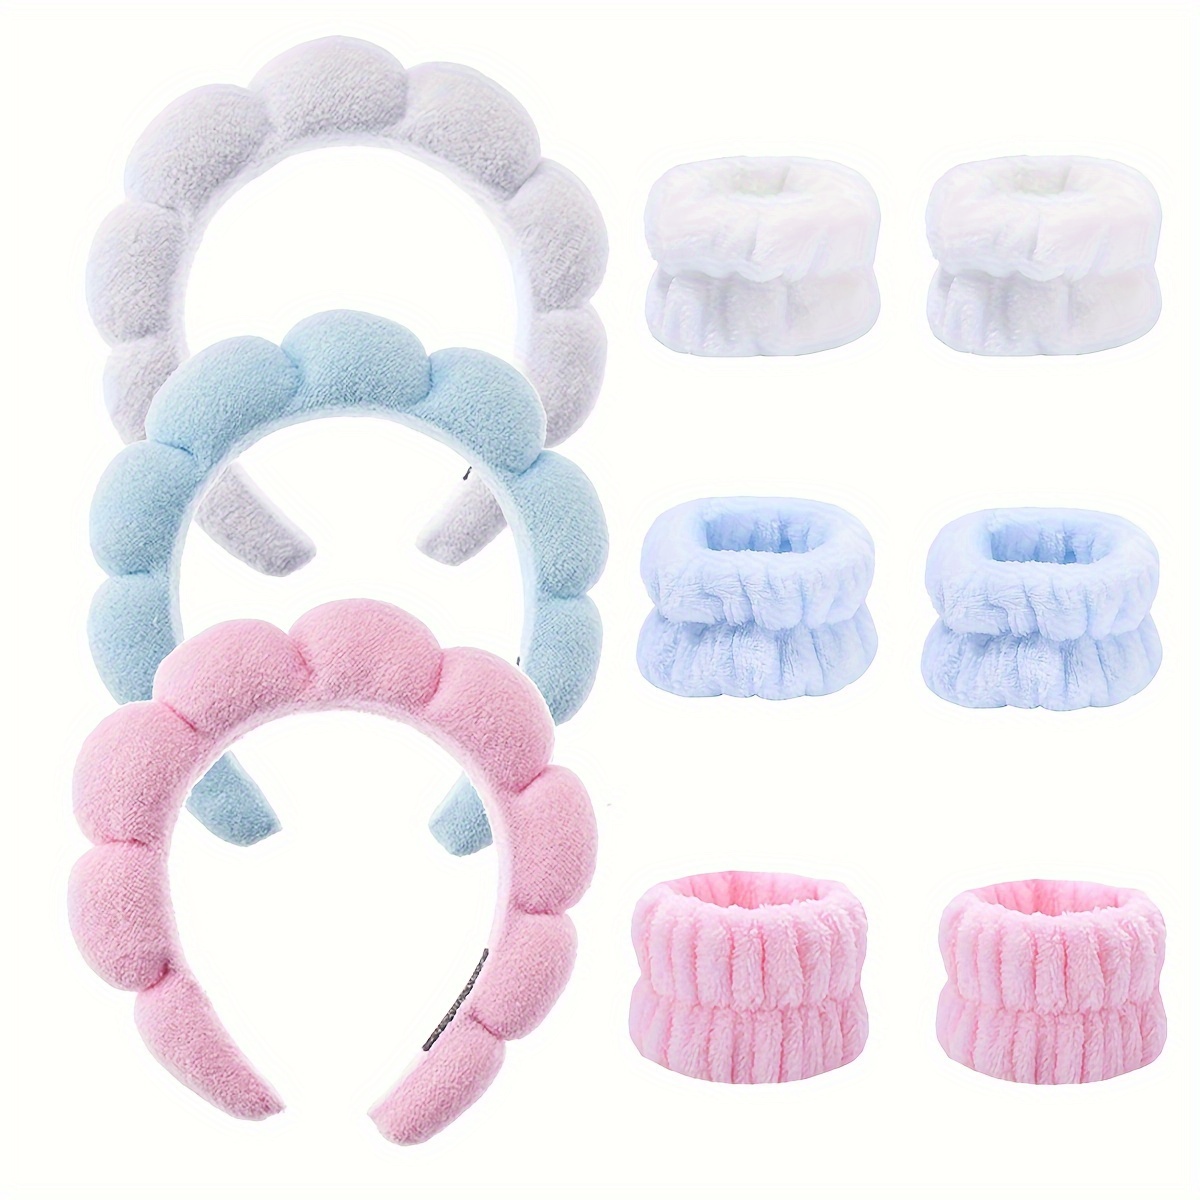 

luxury" 3-piece Set: Soft Twist Headbands & Elastic Wristbands For Women - Perfect For Spa, Makeup, And Skincare